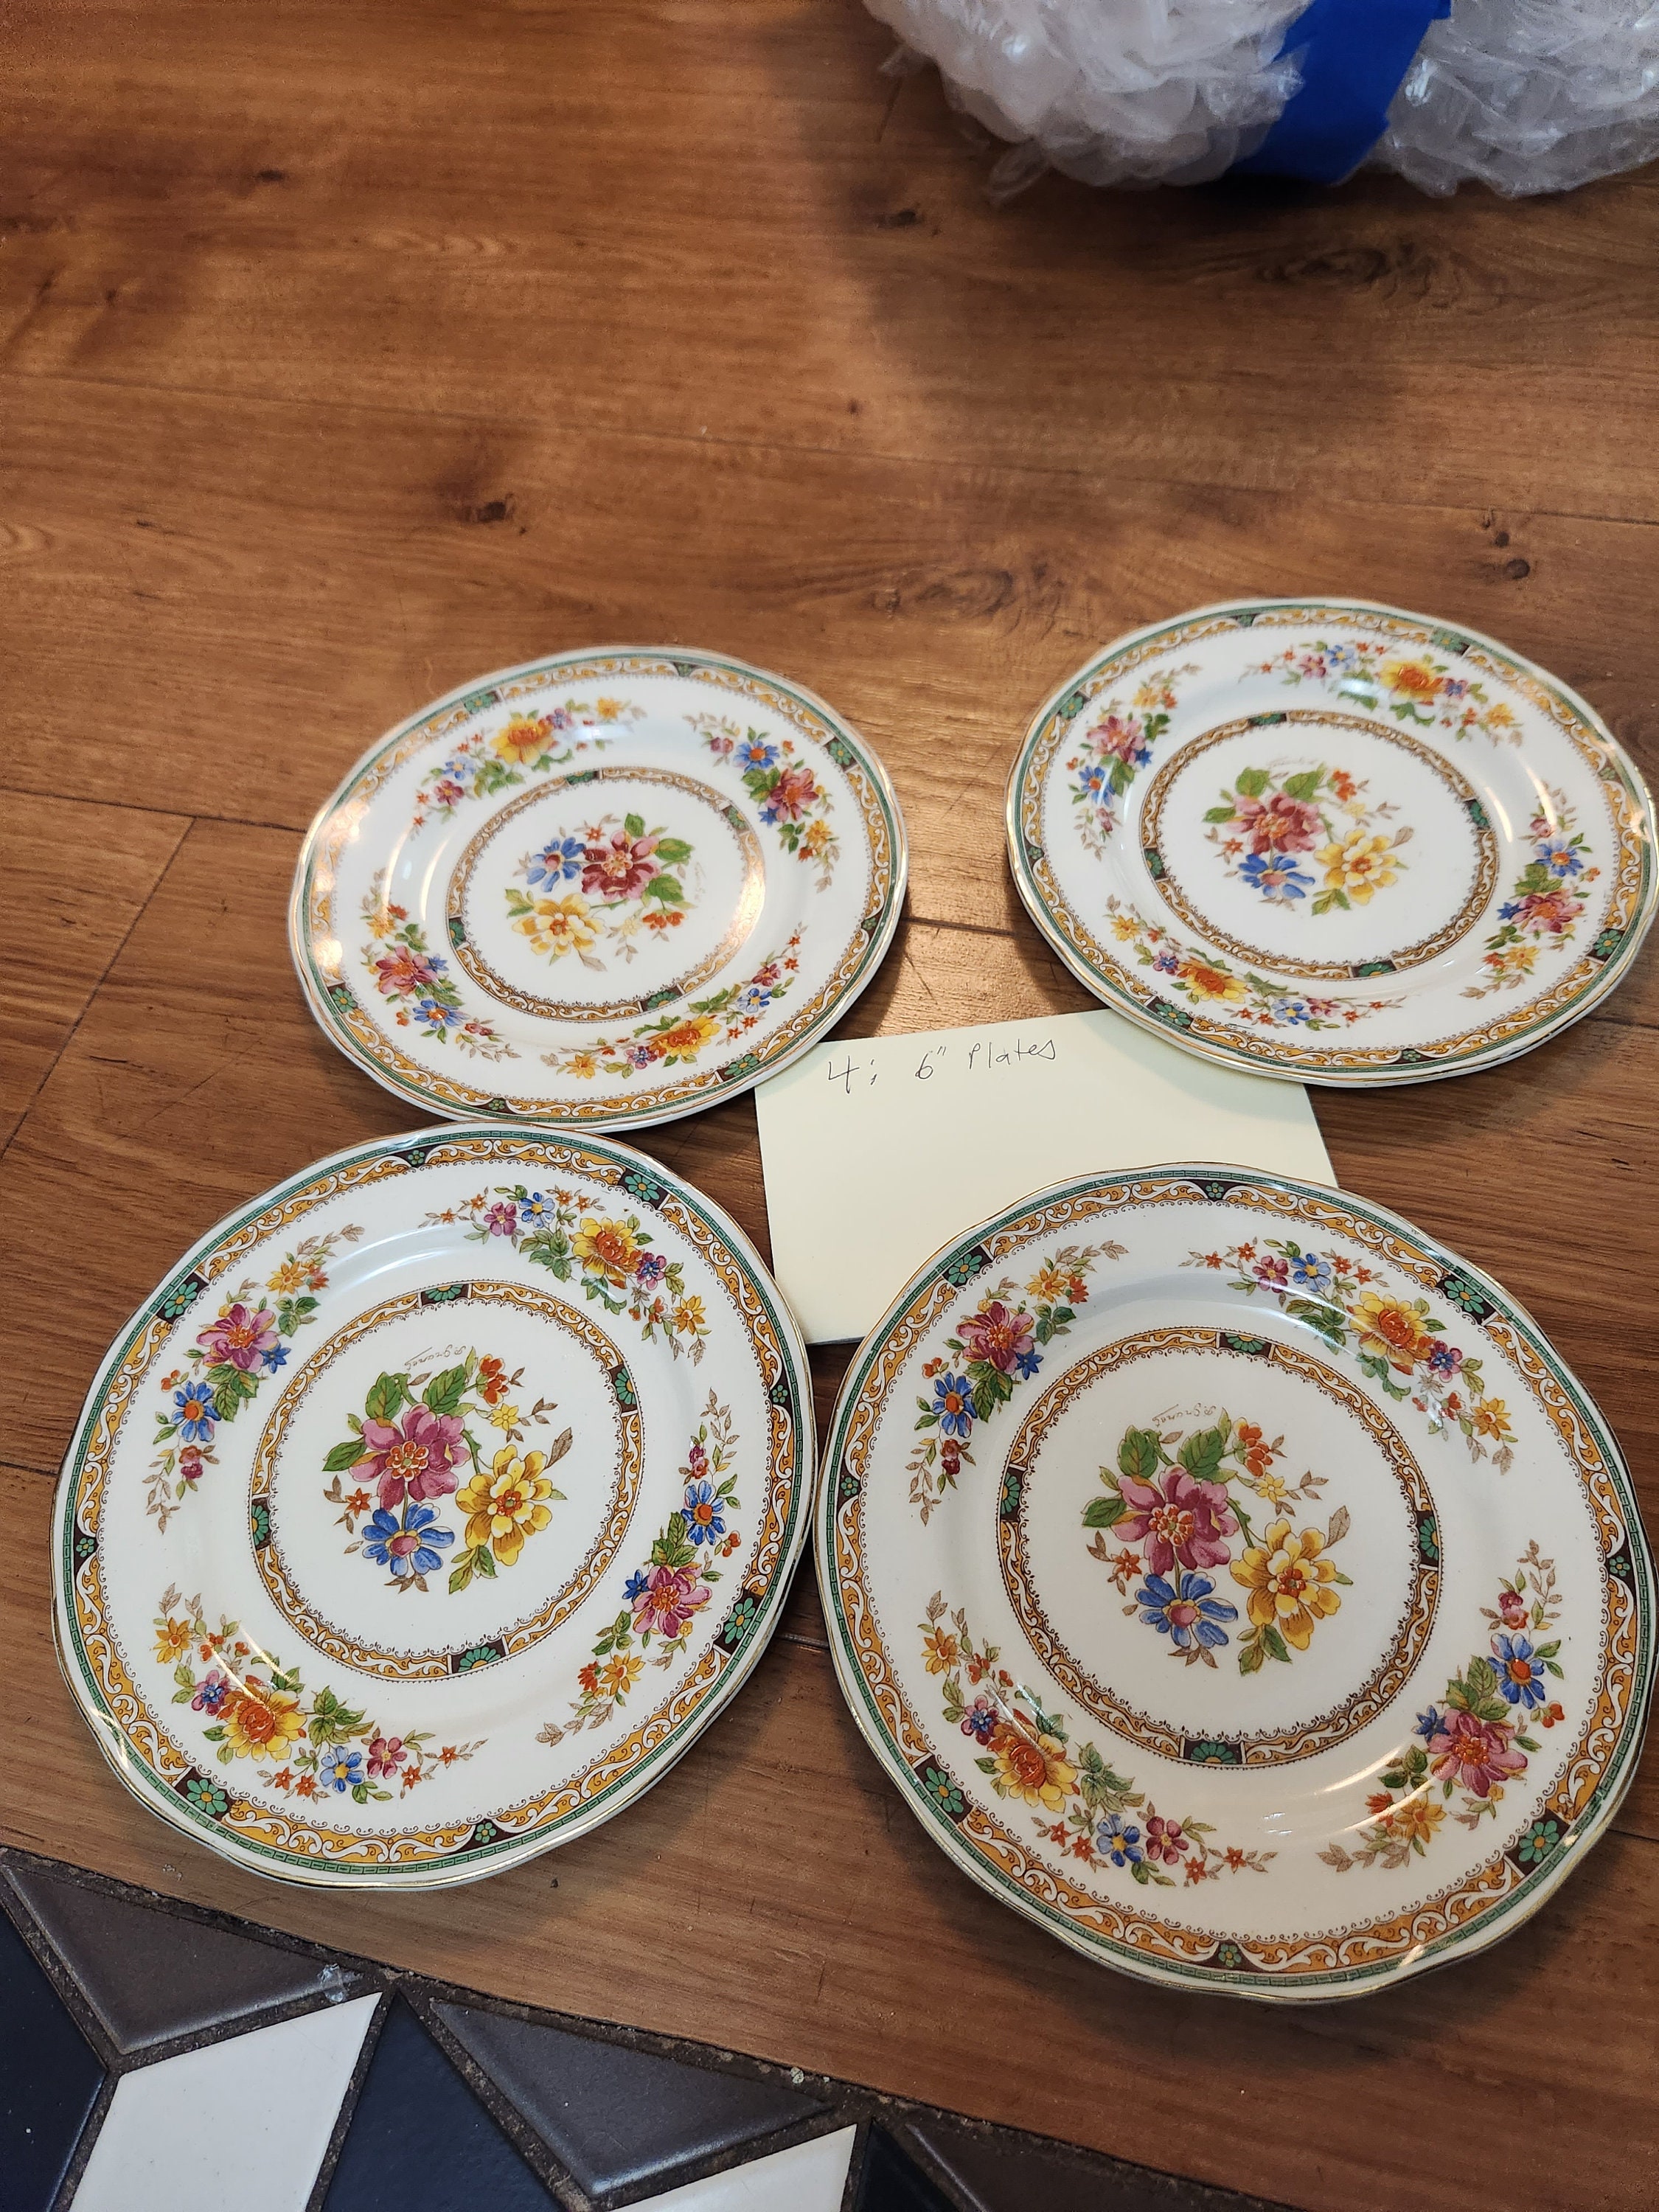 19 Piece Manitou by Grindley Staffordshire England Ironstone 